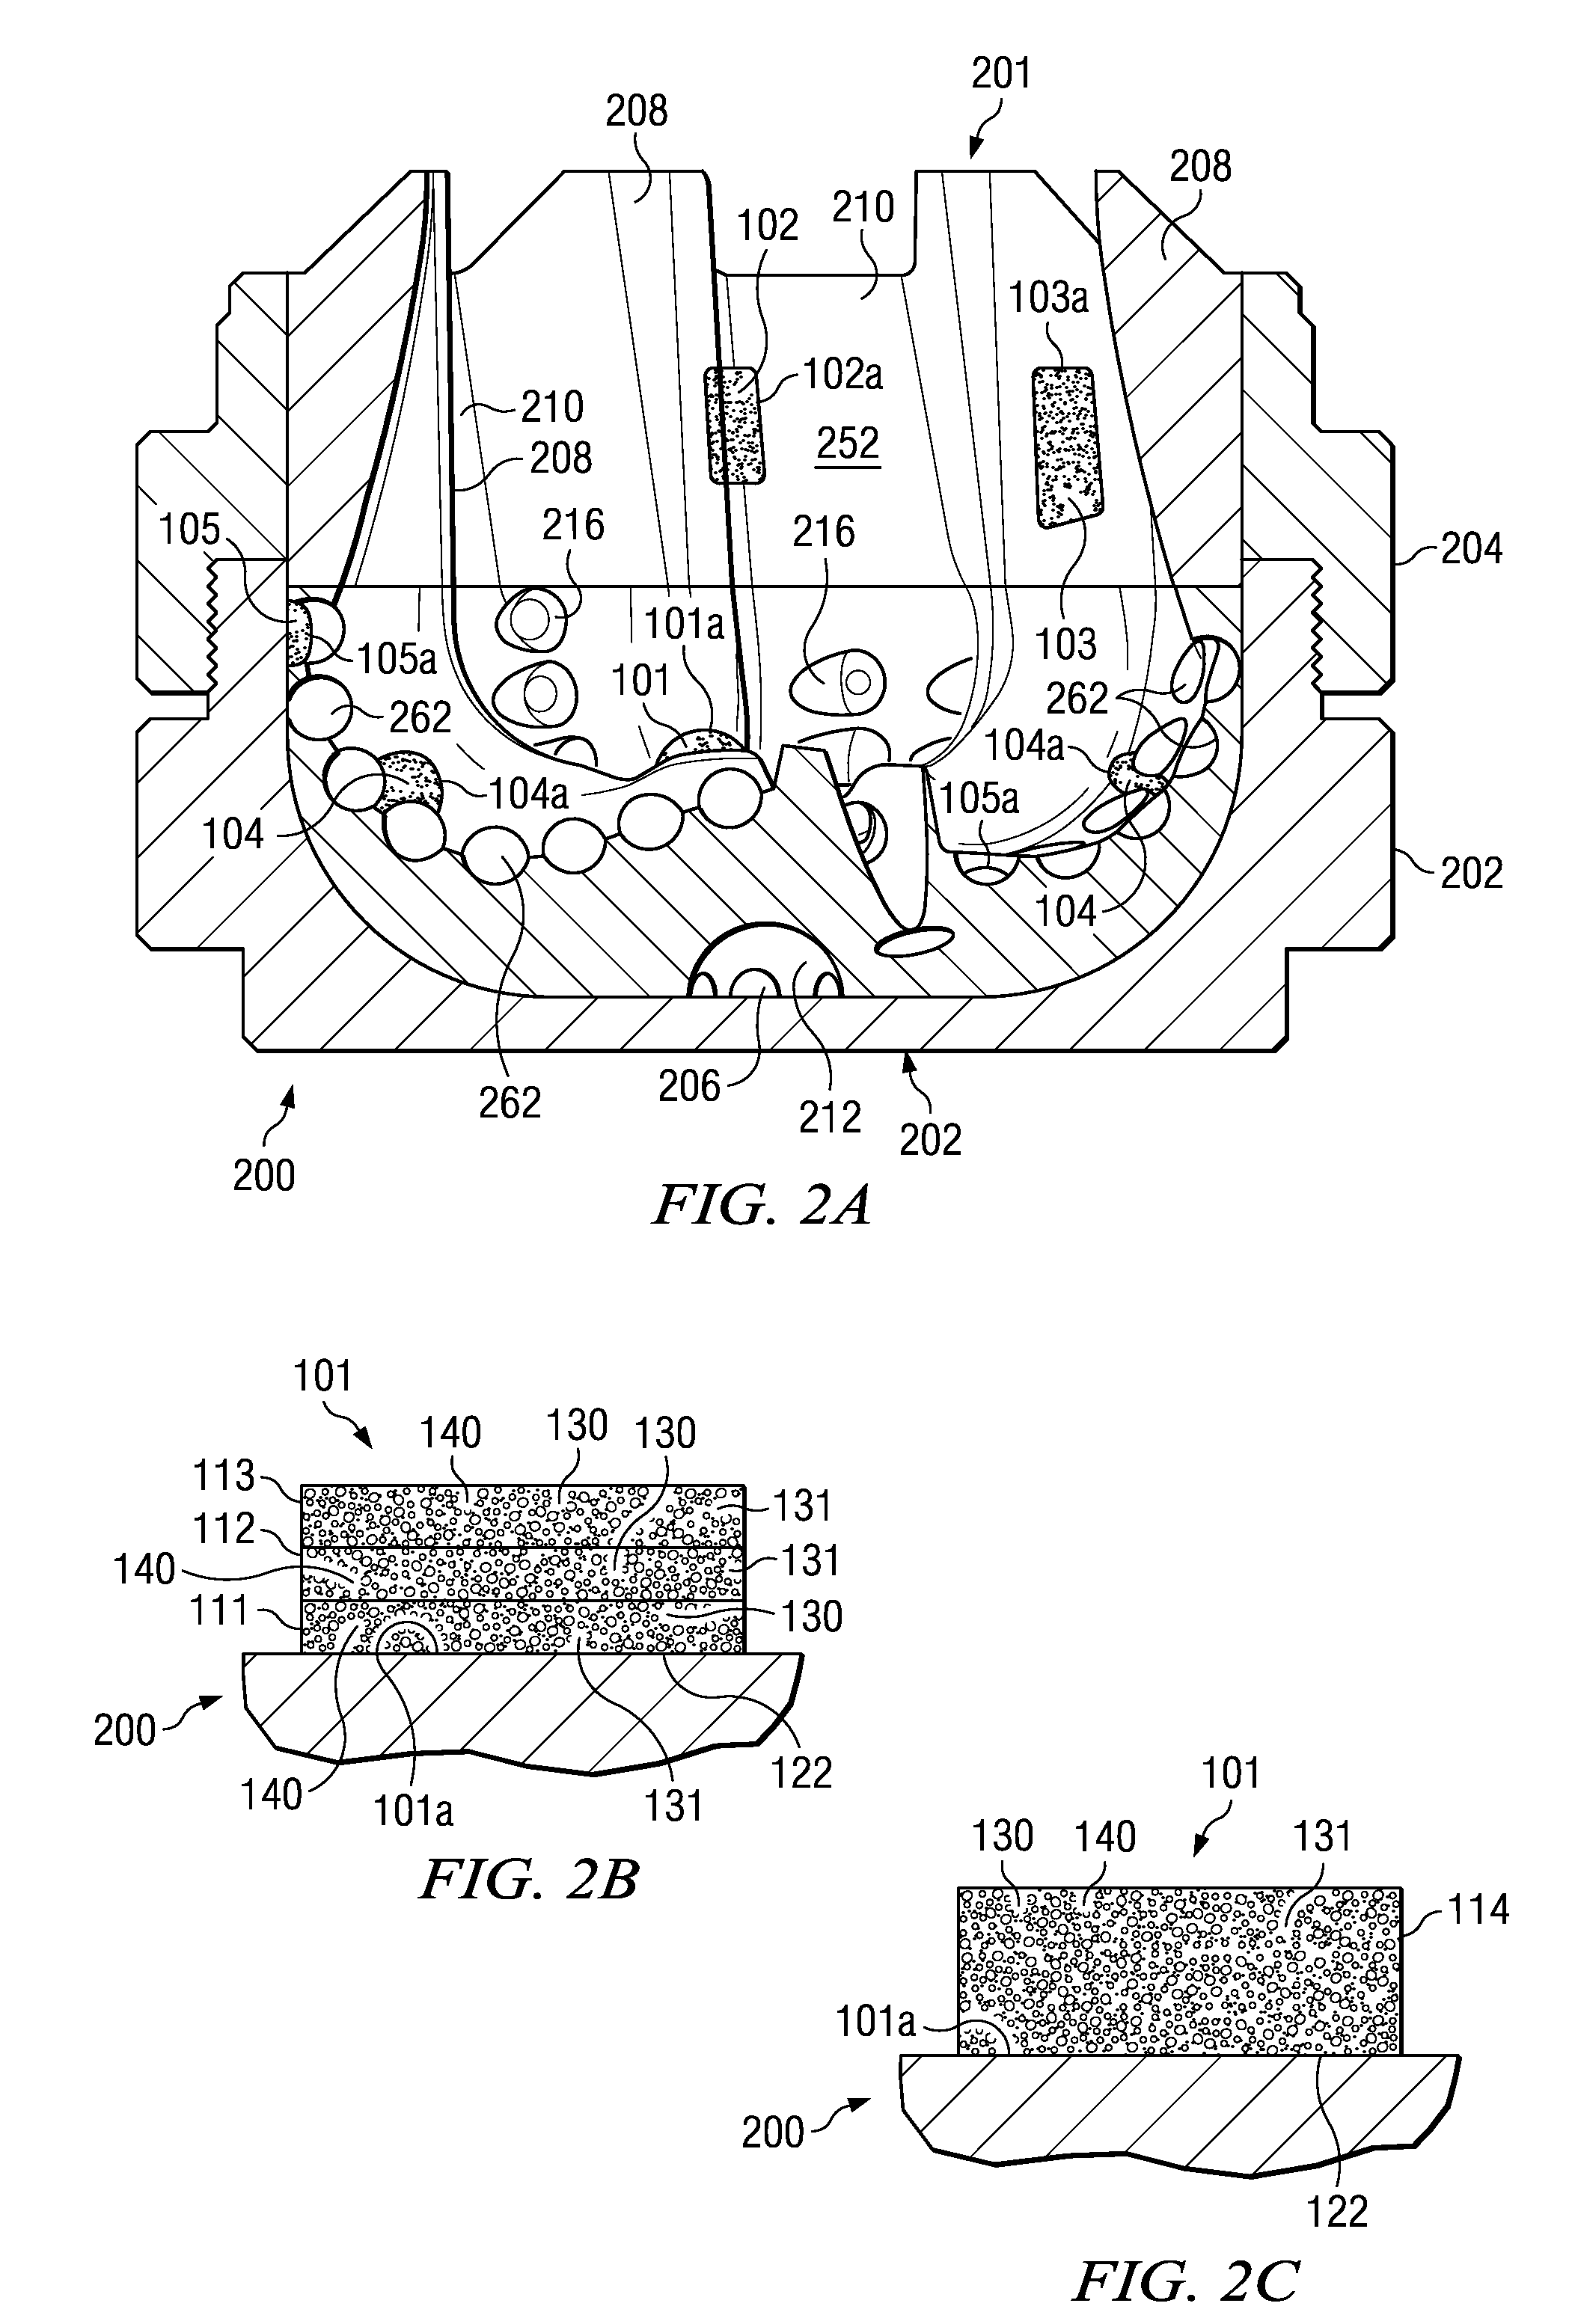 Matrix Drill Bit with Dual Surface Compositions and Methods of Manufacture